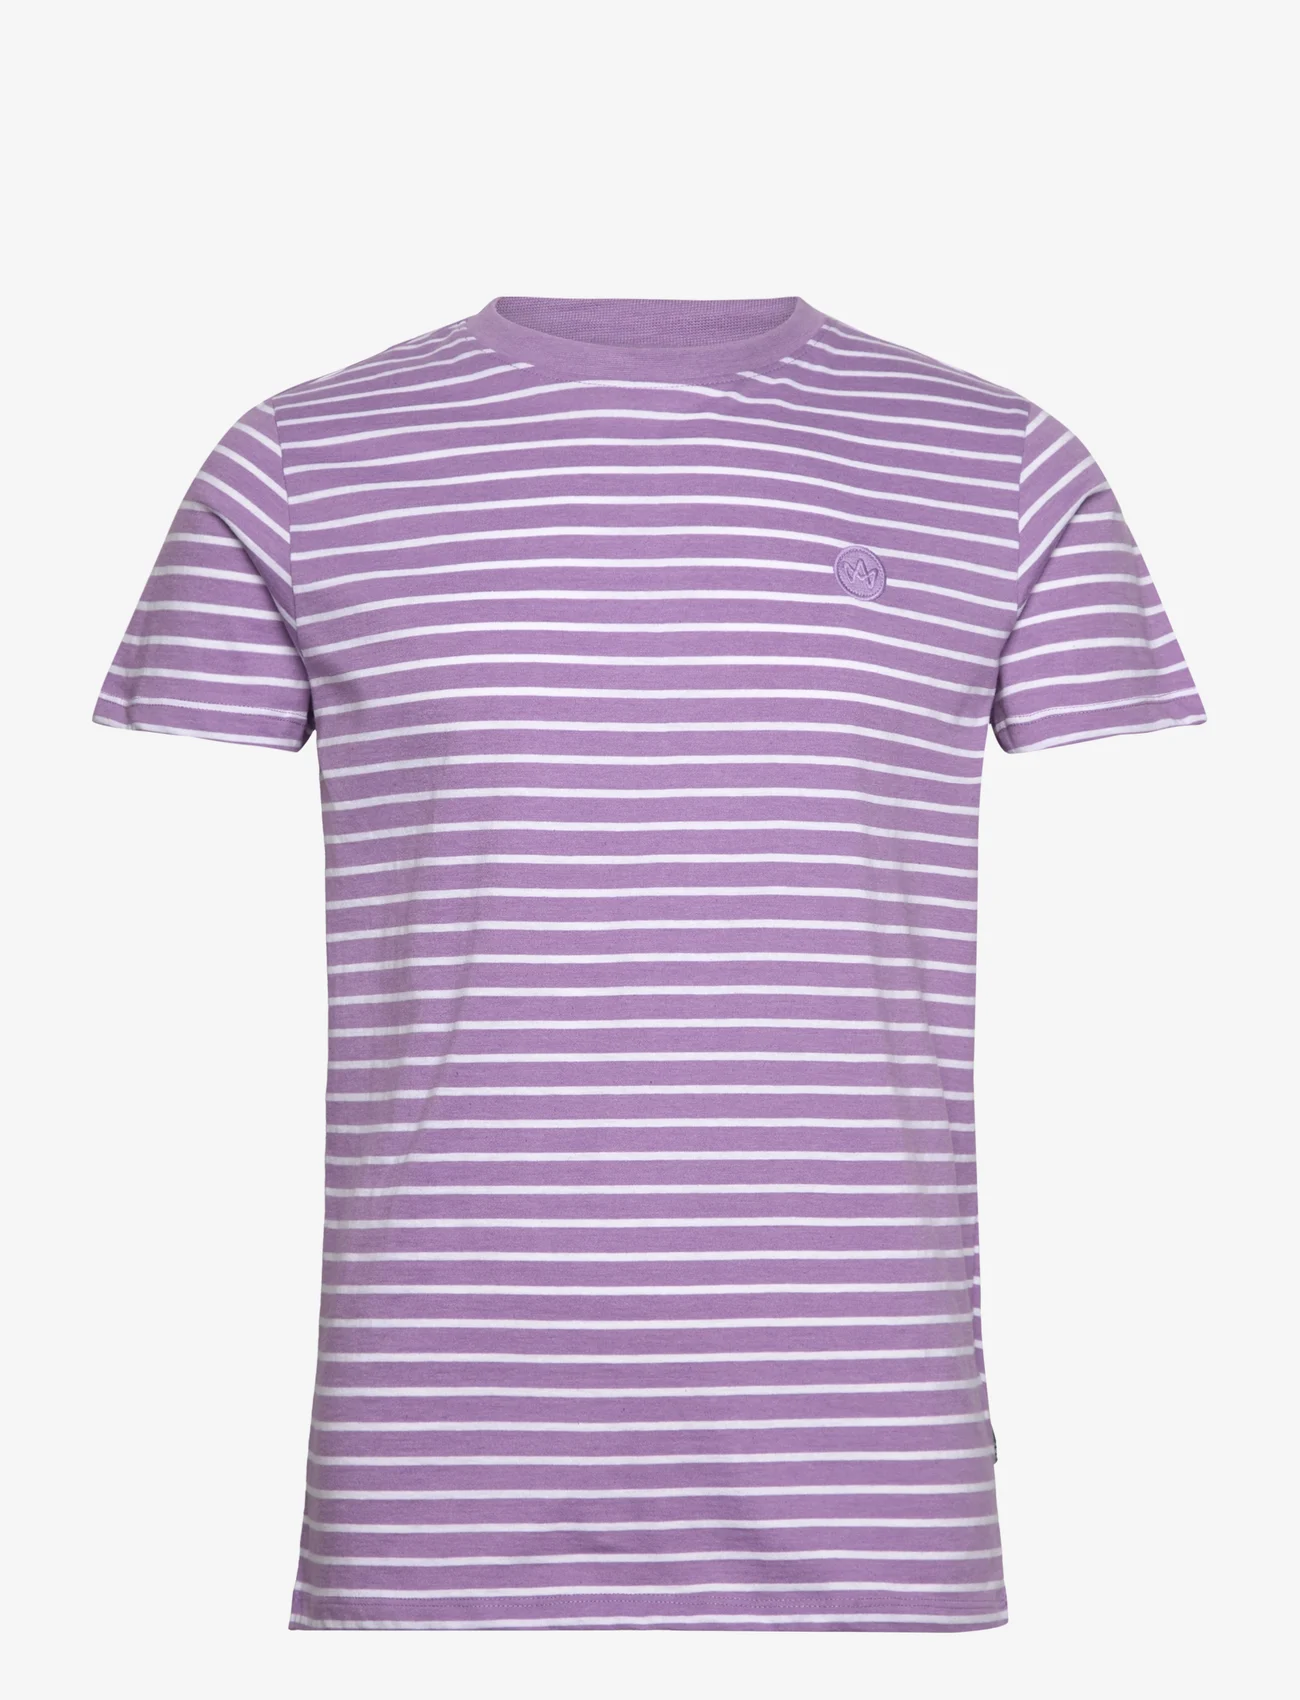 Kronstadt - Timmi Organic/Recycled striped t-shirt - lavender / white - 0